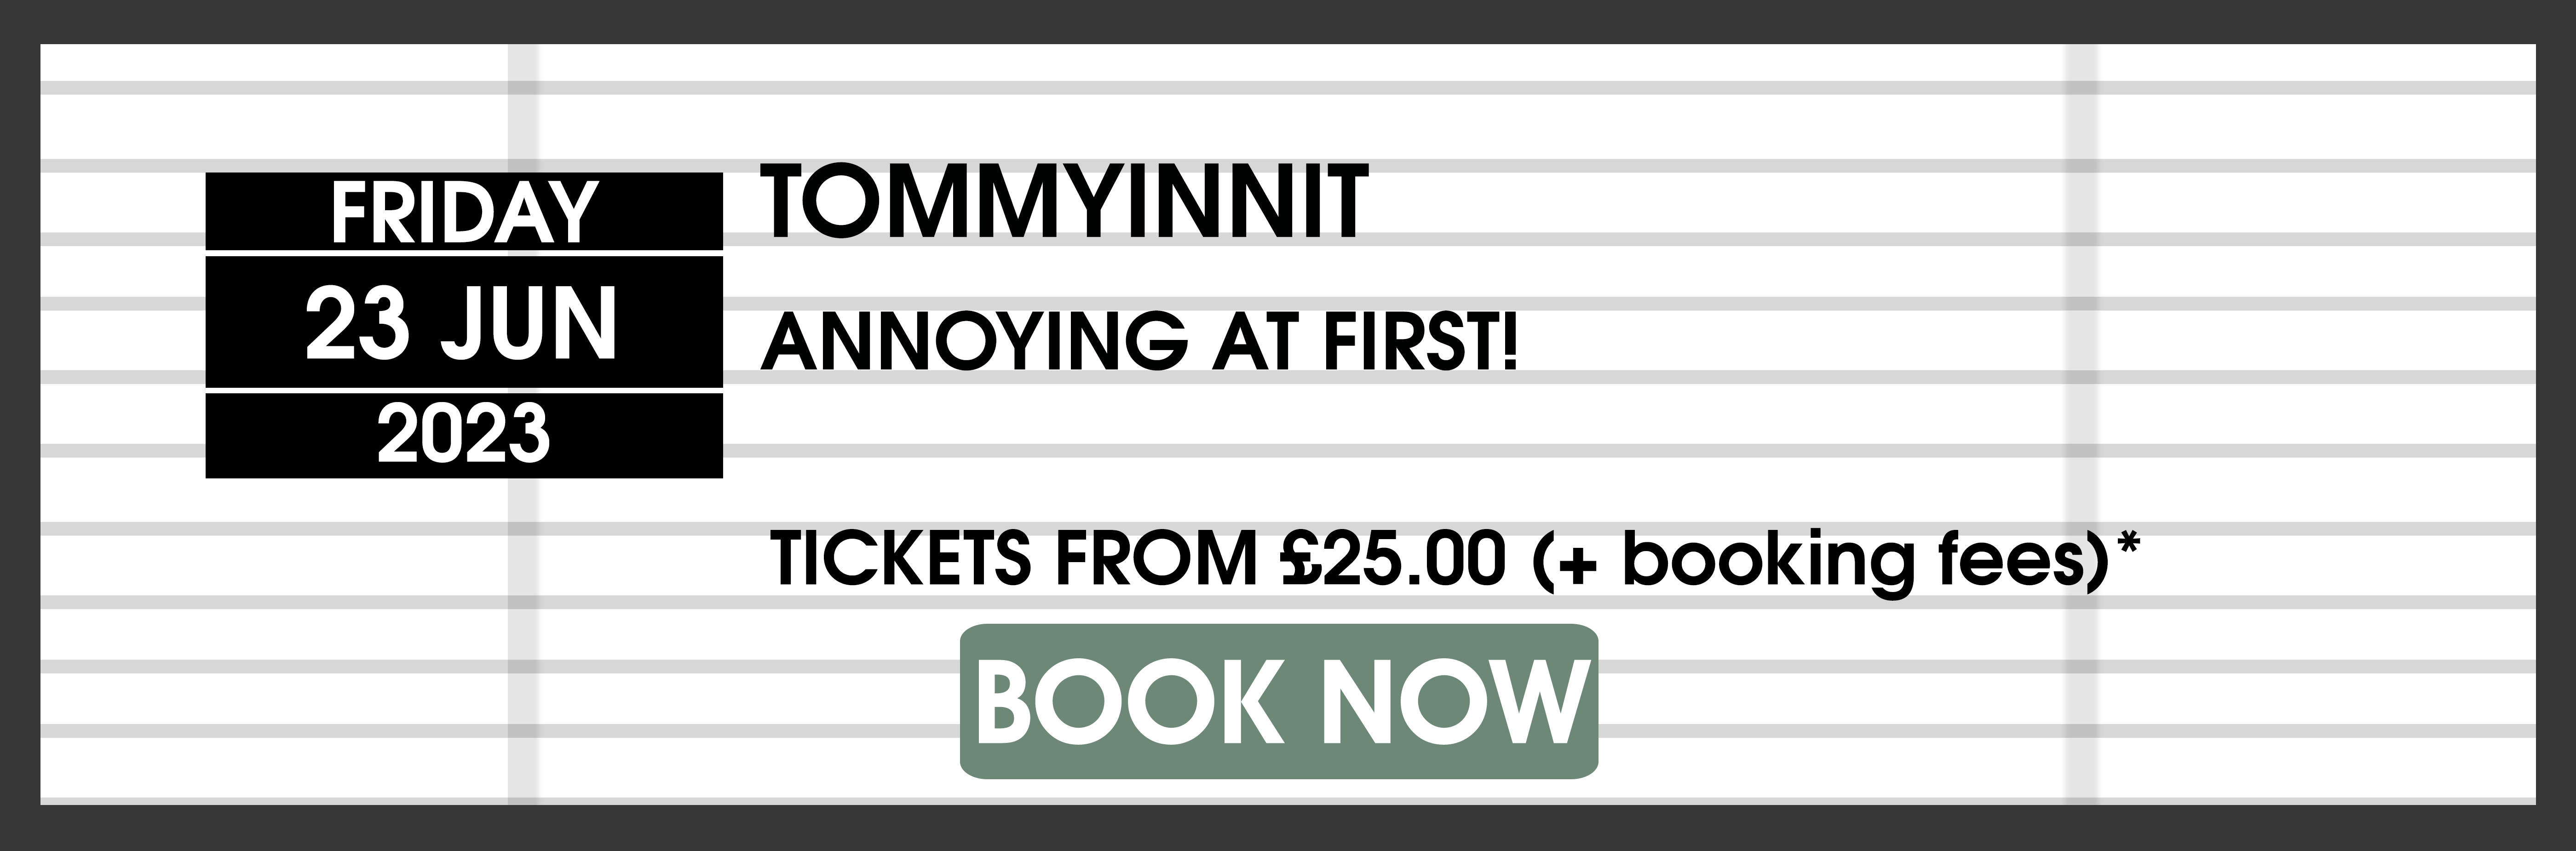 23.06.23 TommyInnit BOOK NOW